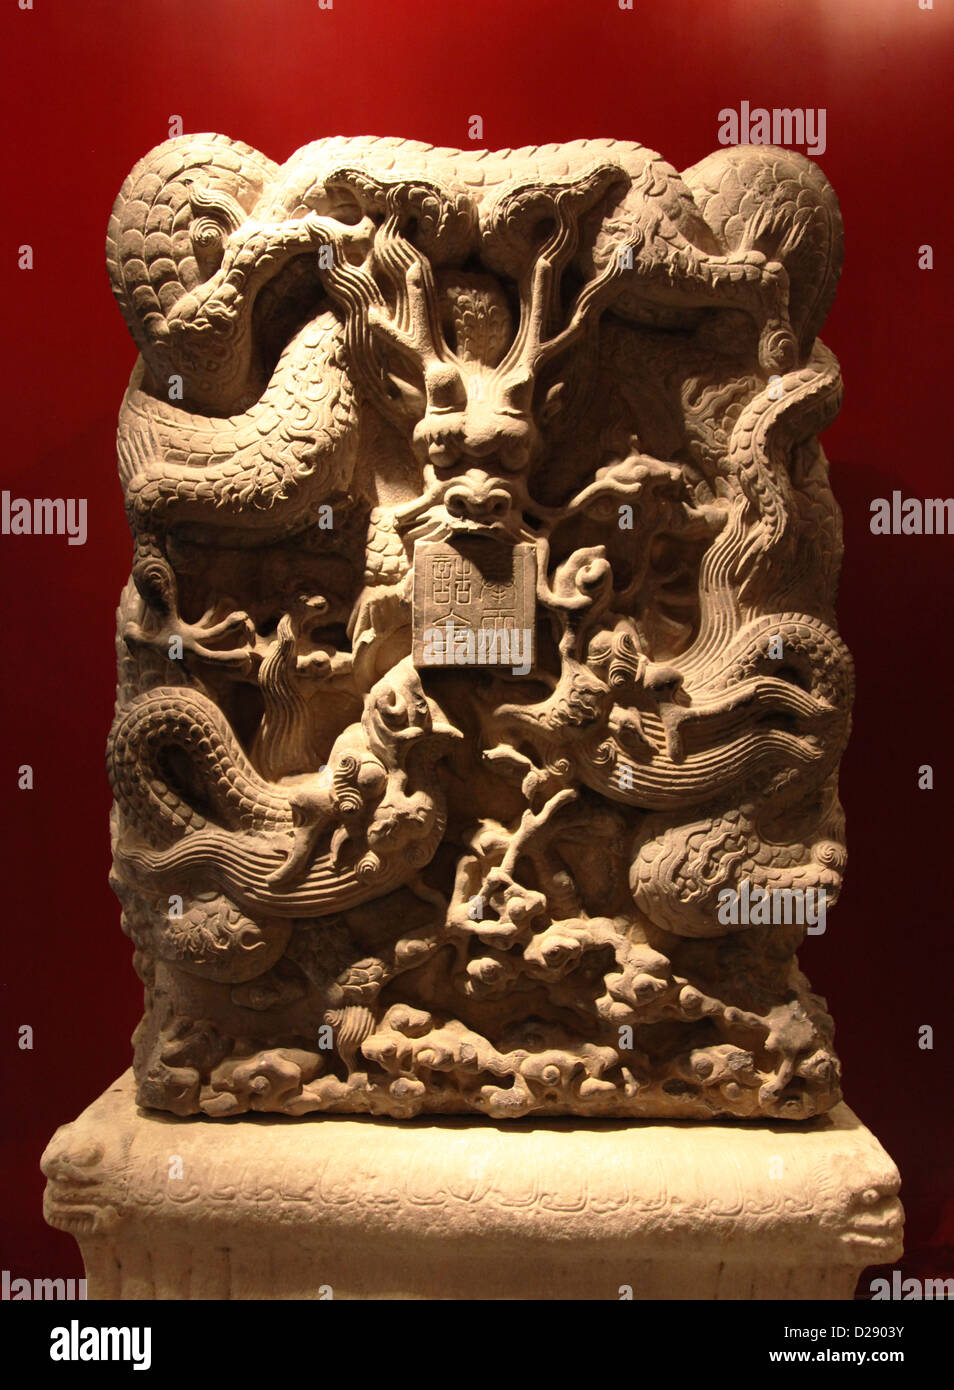 It's a photo of a statue on a red background. It is a Buddha head or bas-relief of a dragon Stock Photo